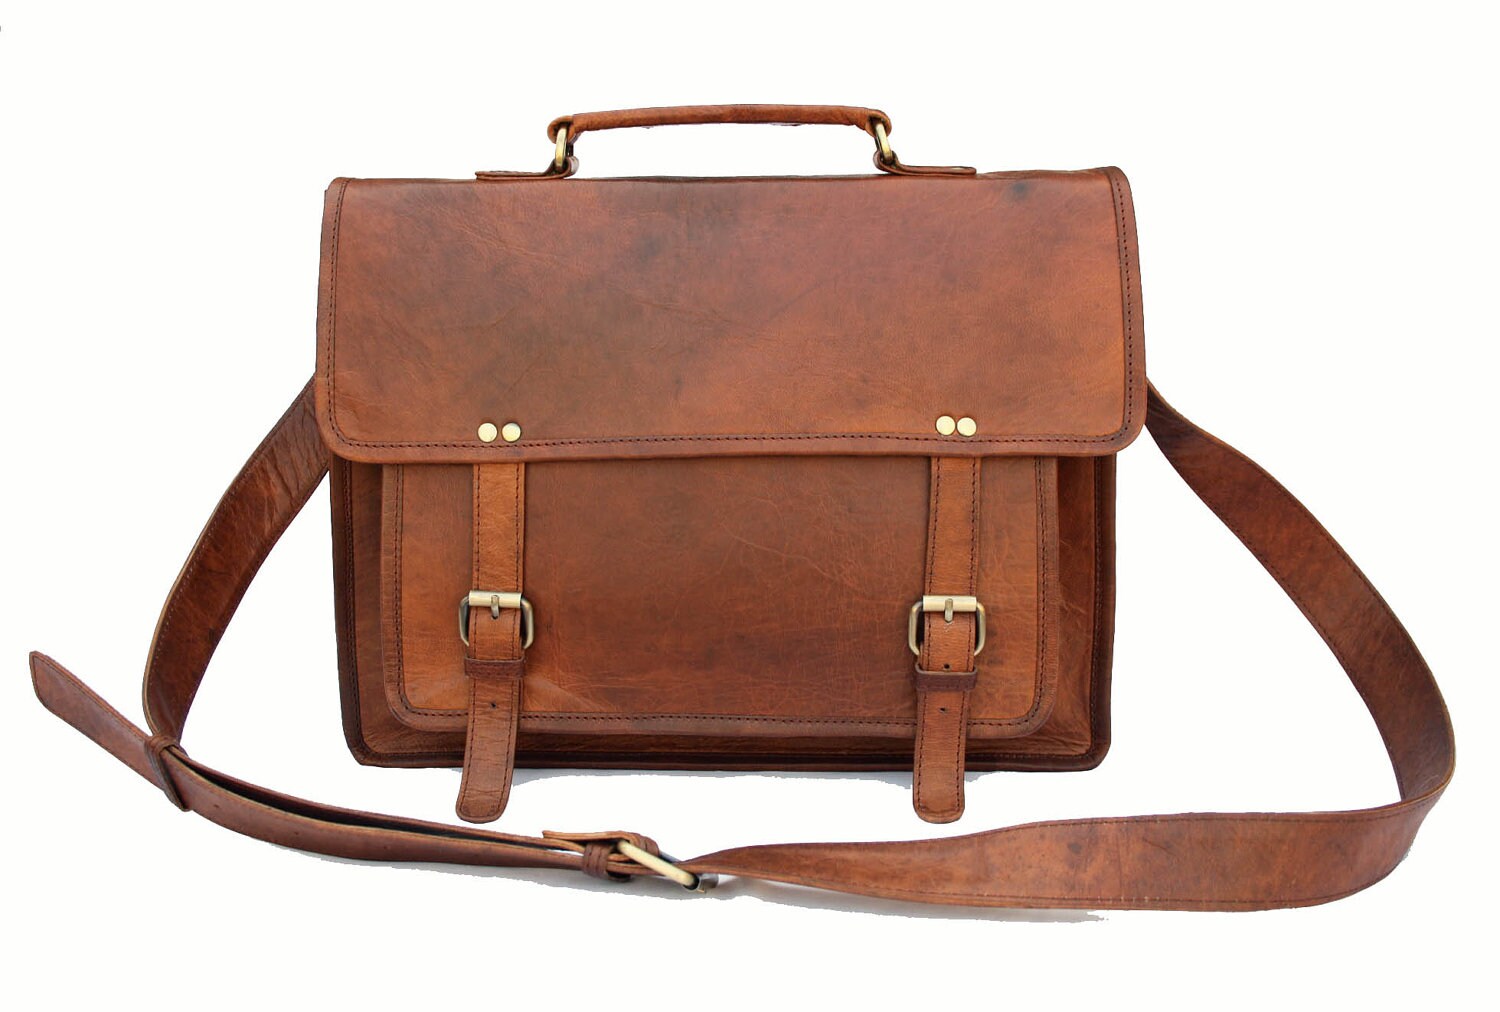 Leather Laptop Bags For Men In India